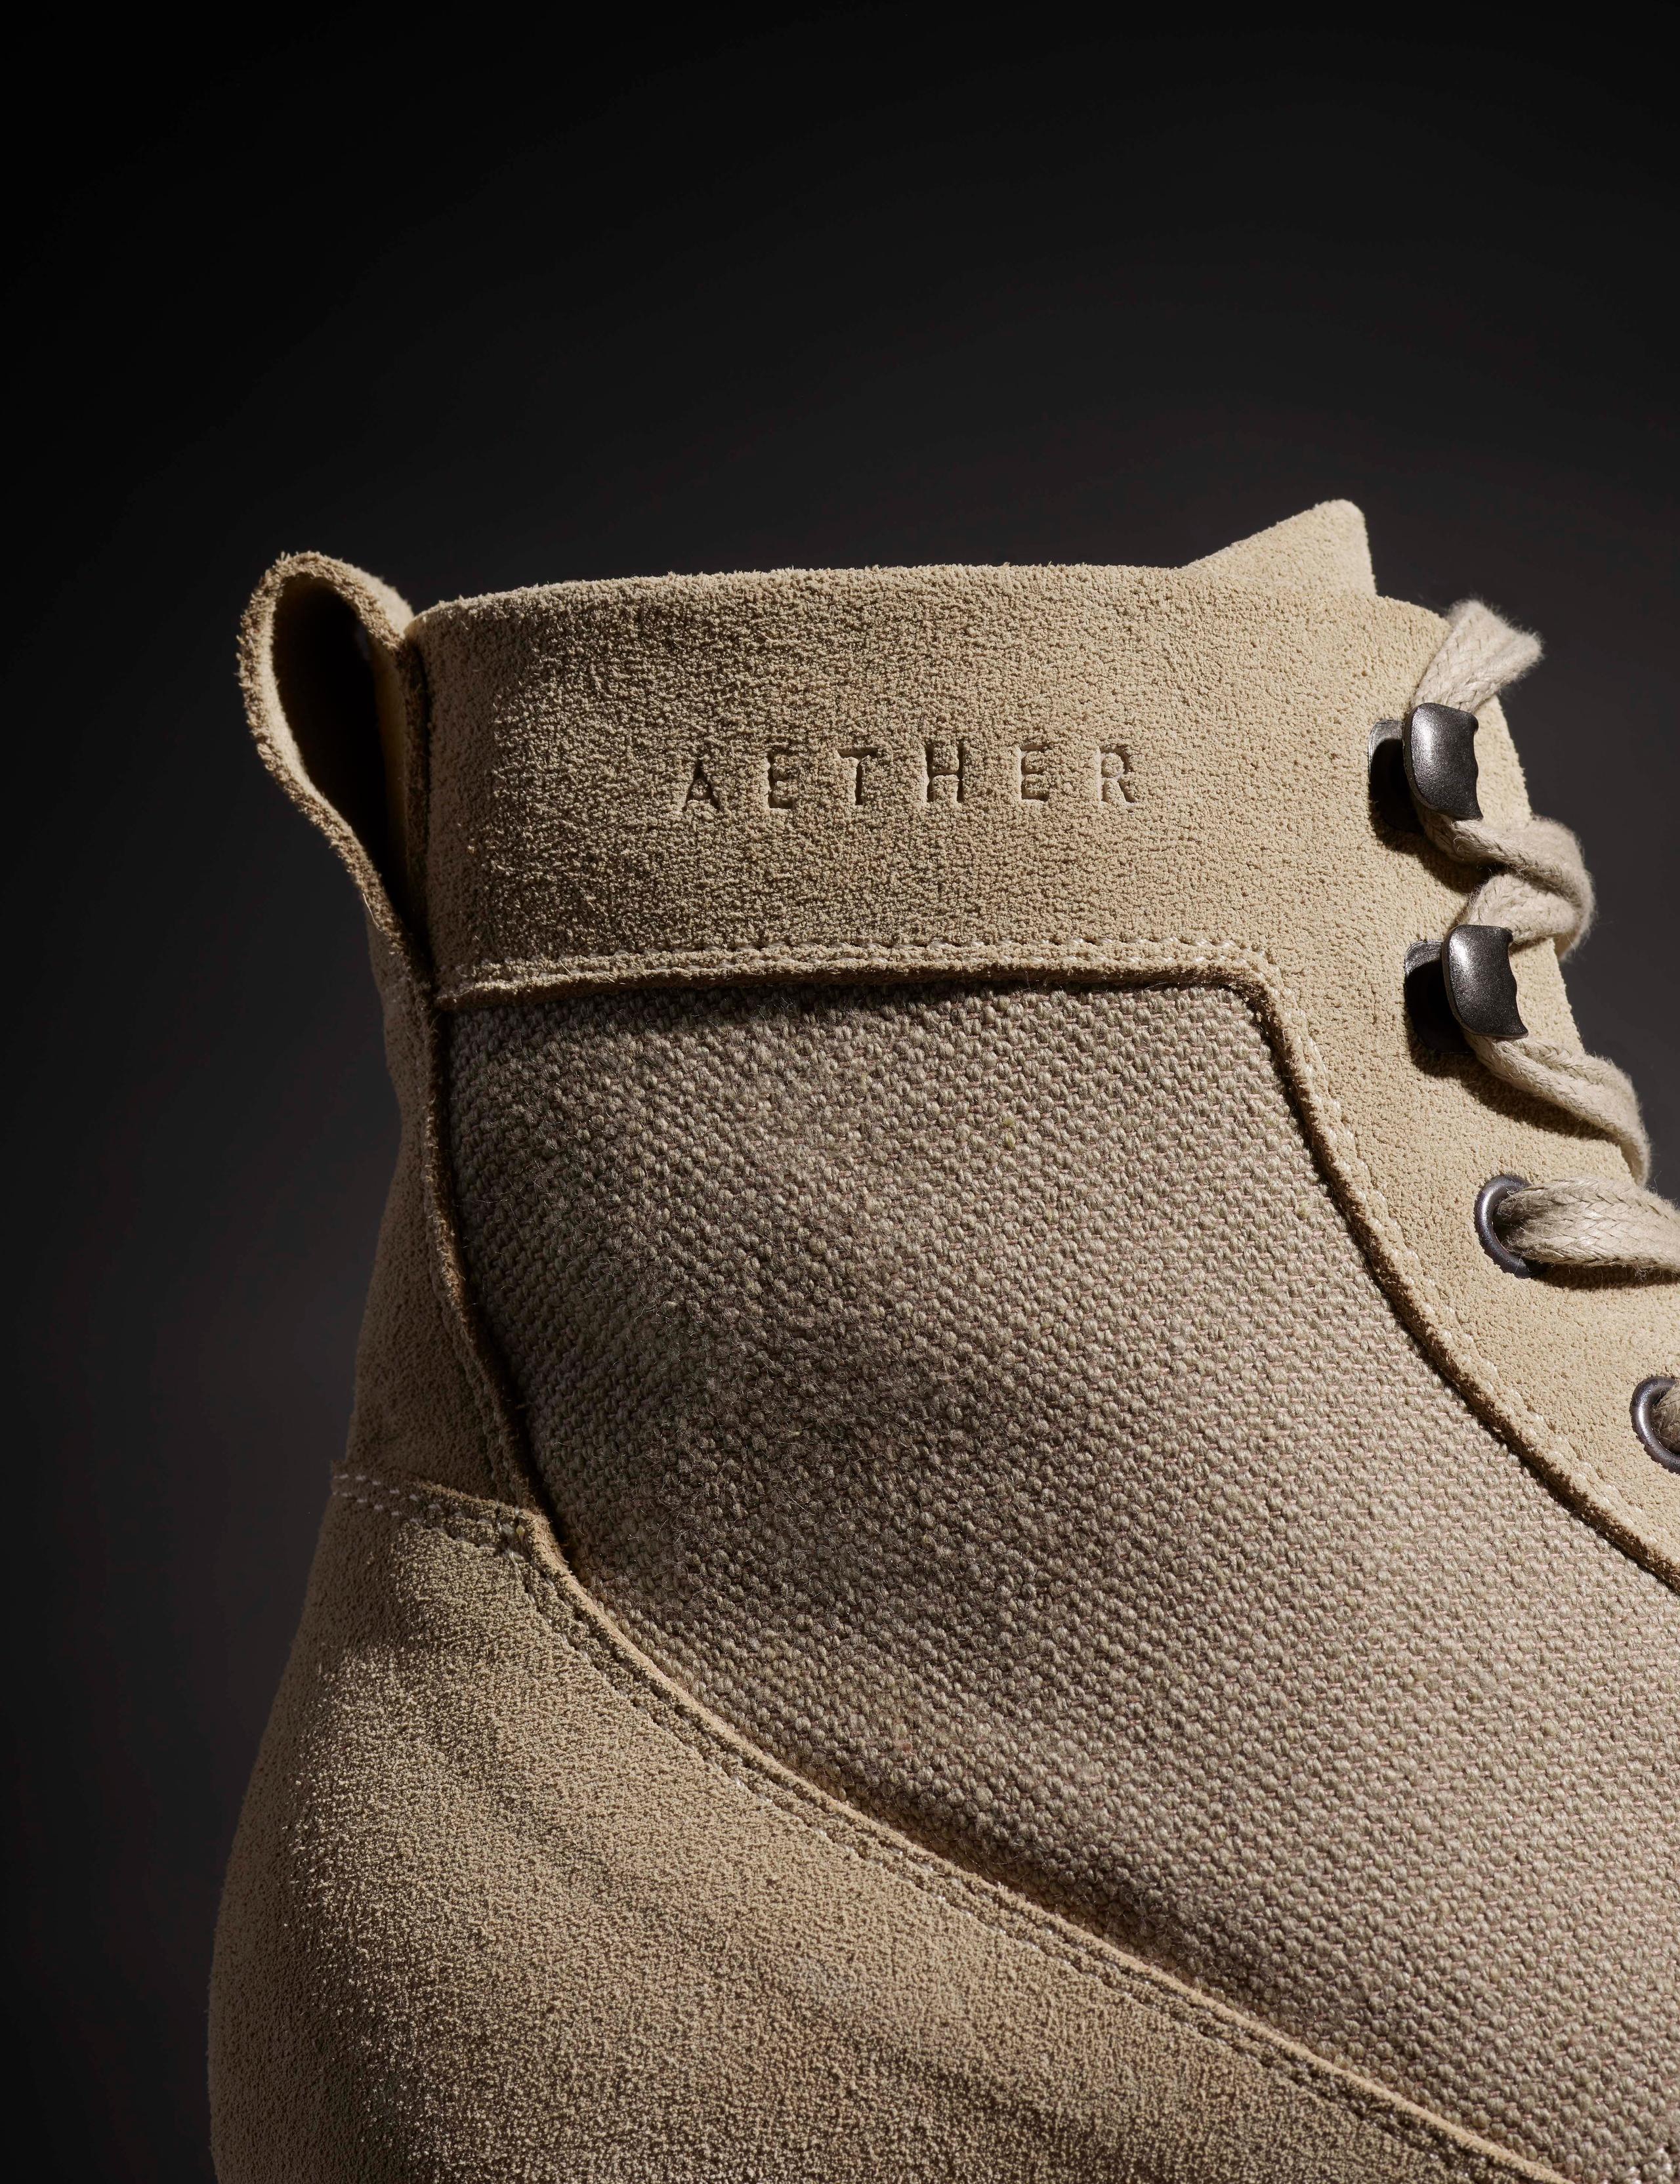 Profile view of Ojai Boot showing canvas and suede upper